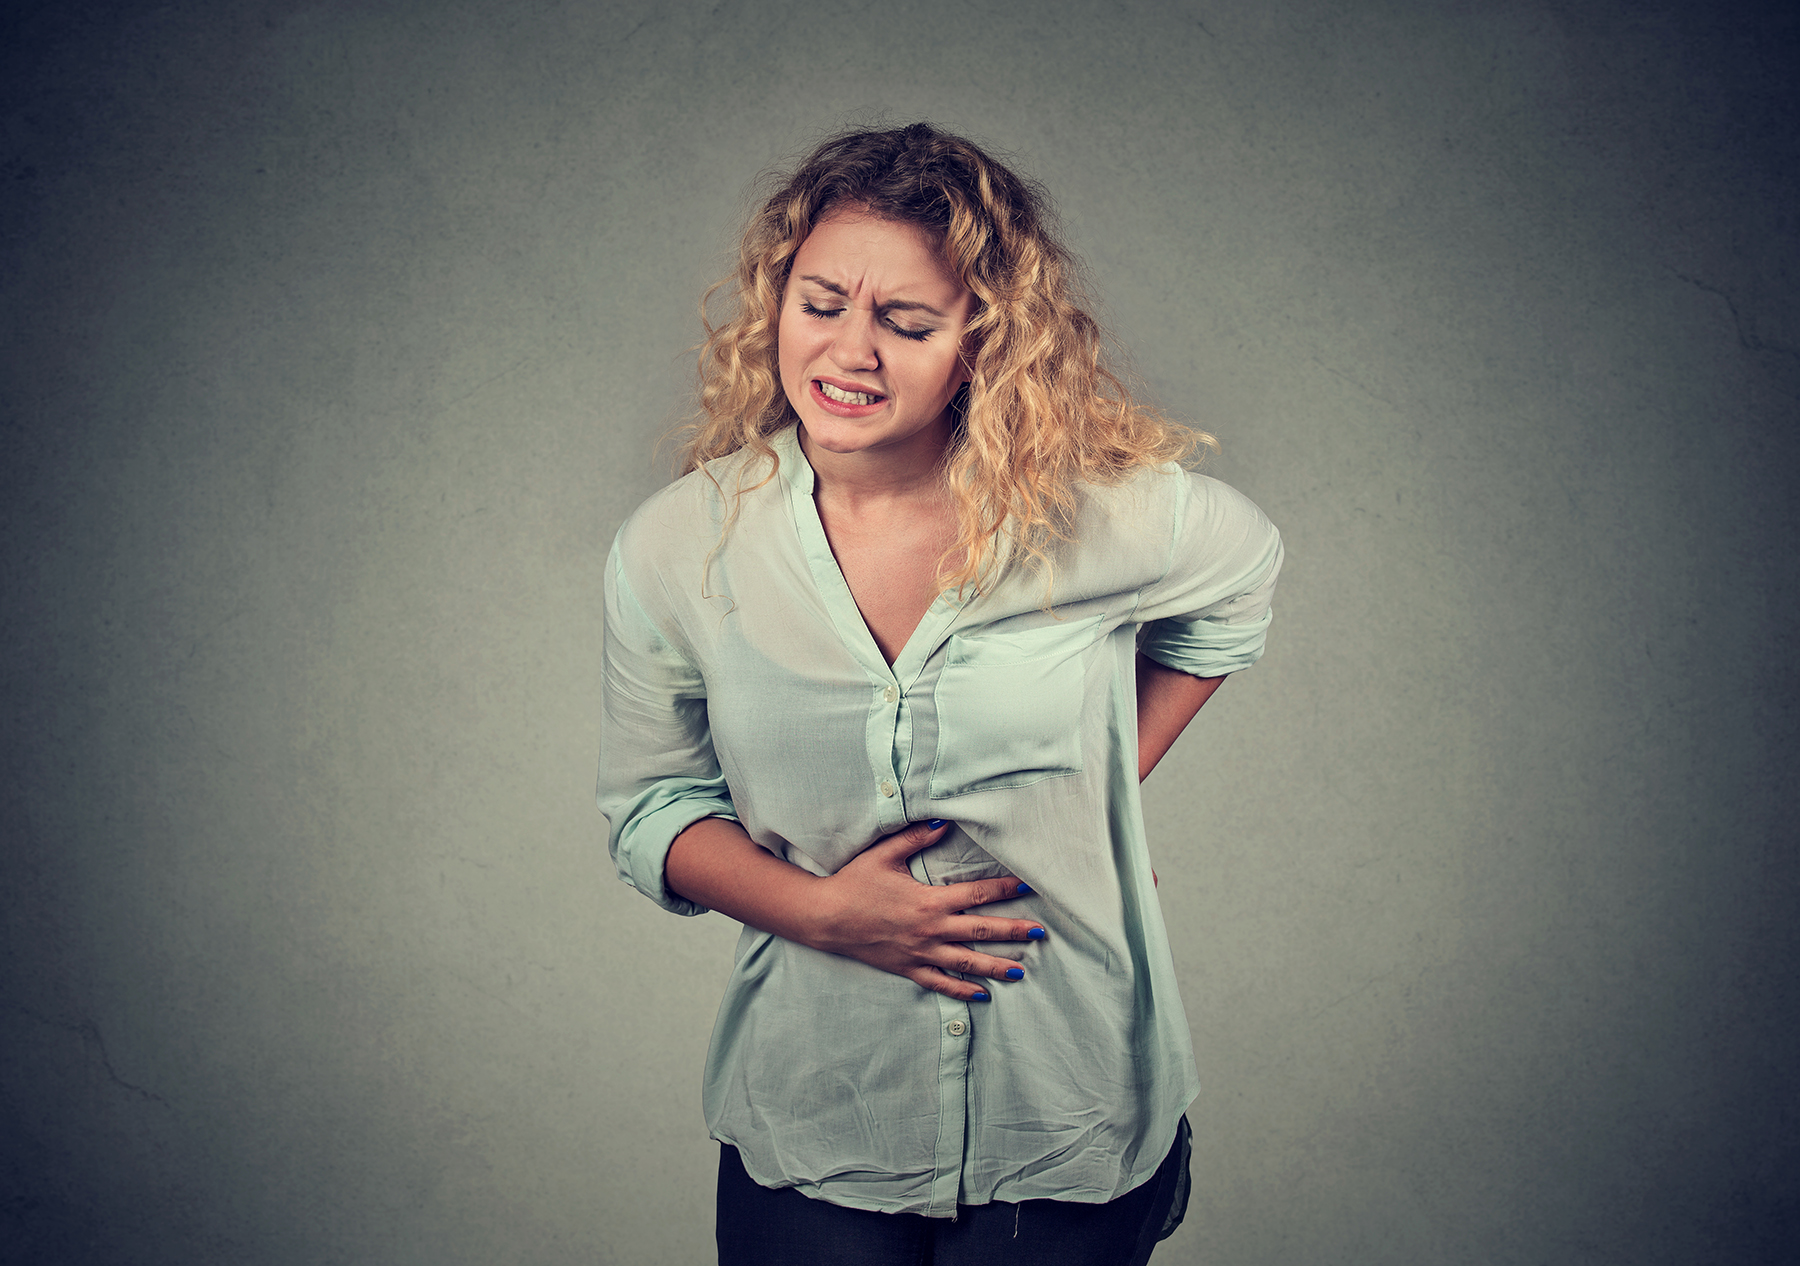 Woman holding stomach in pain